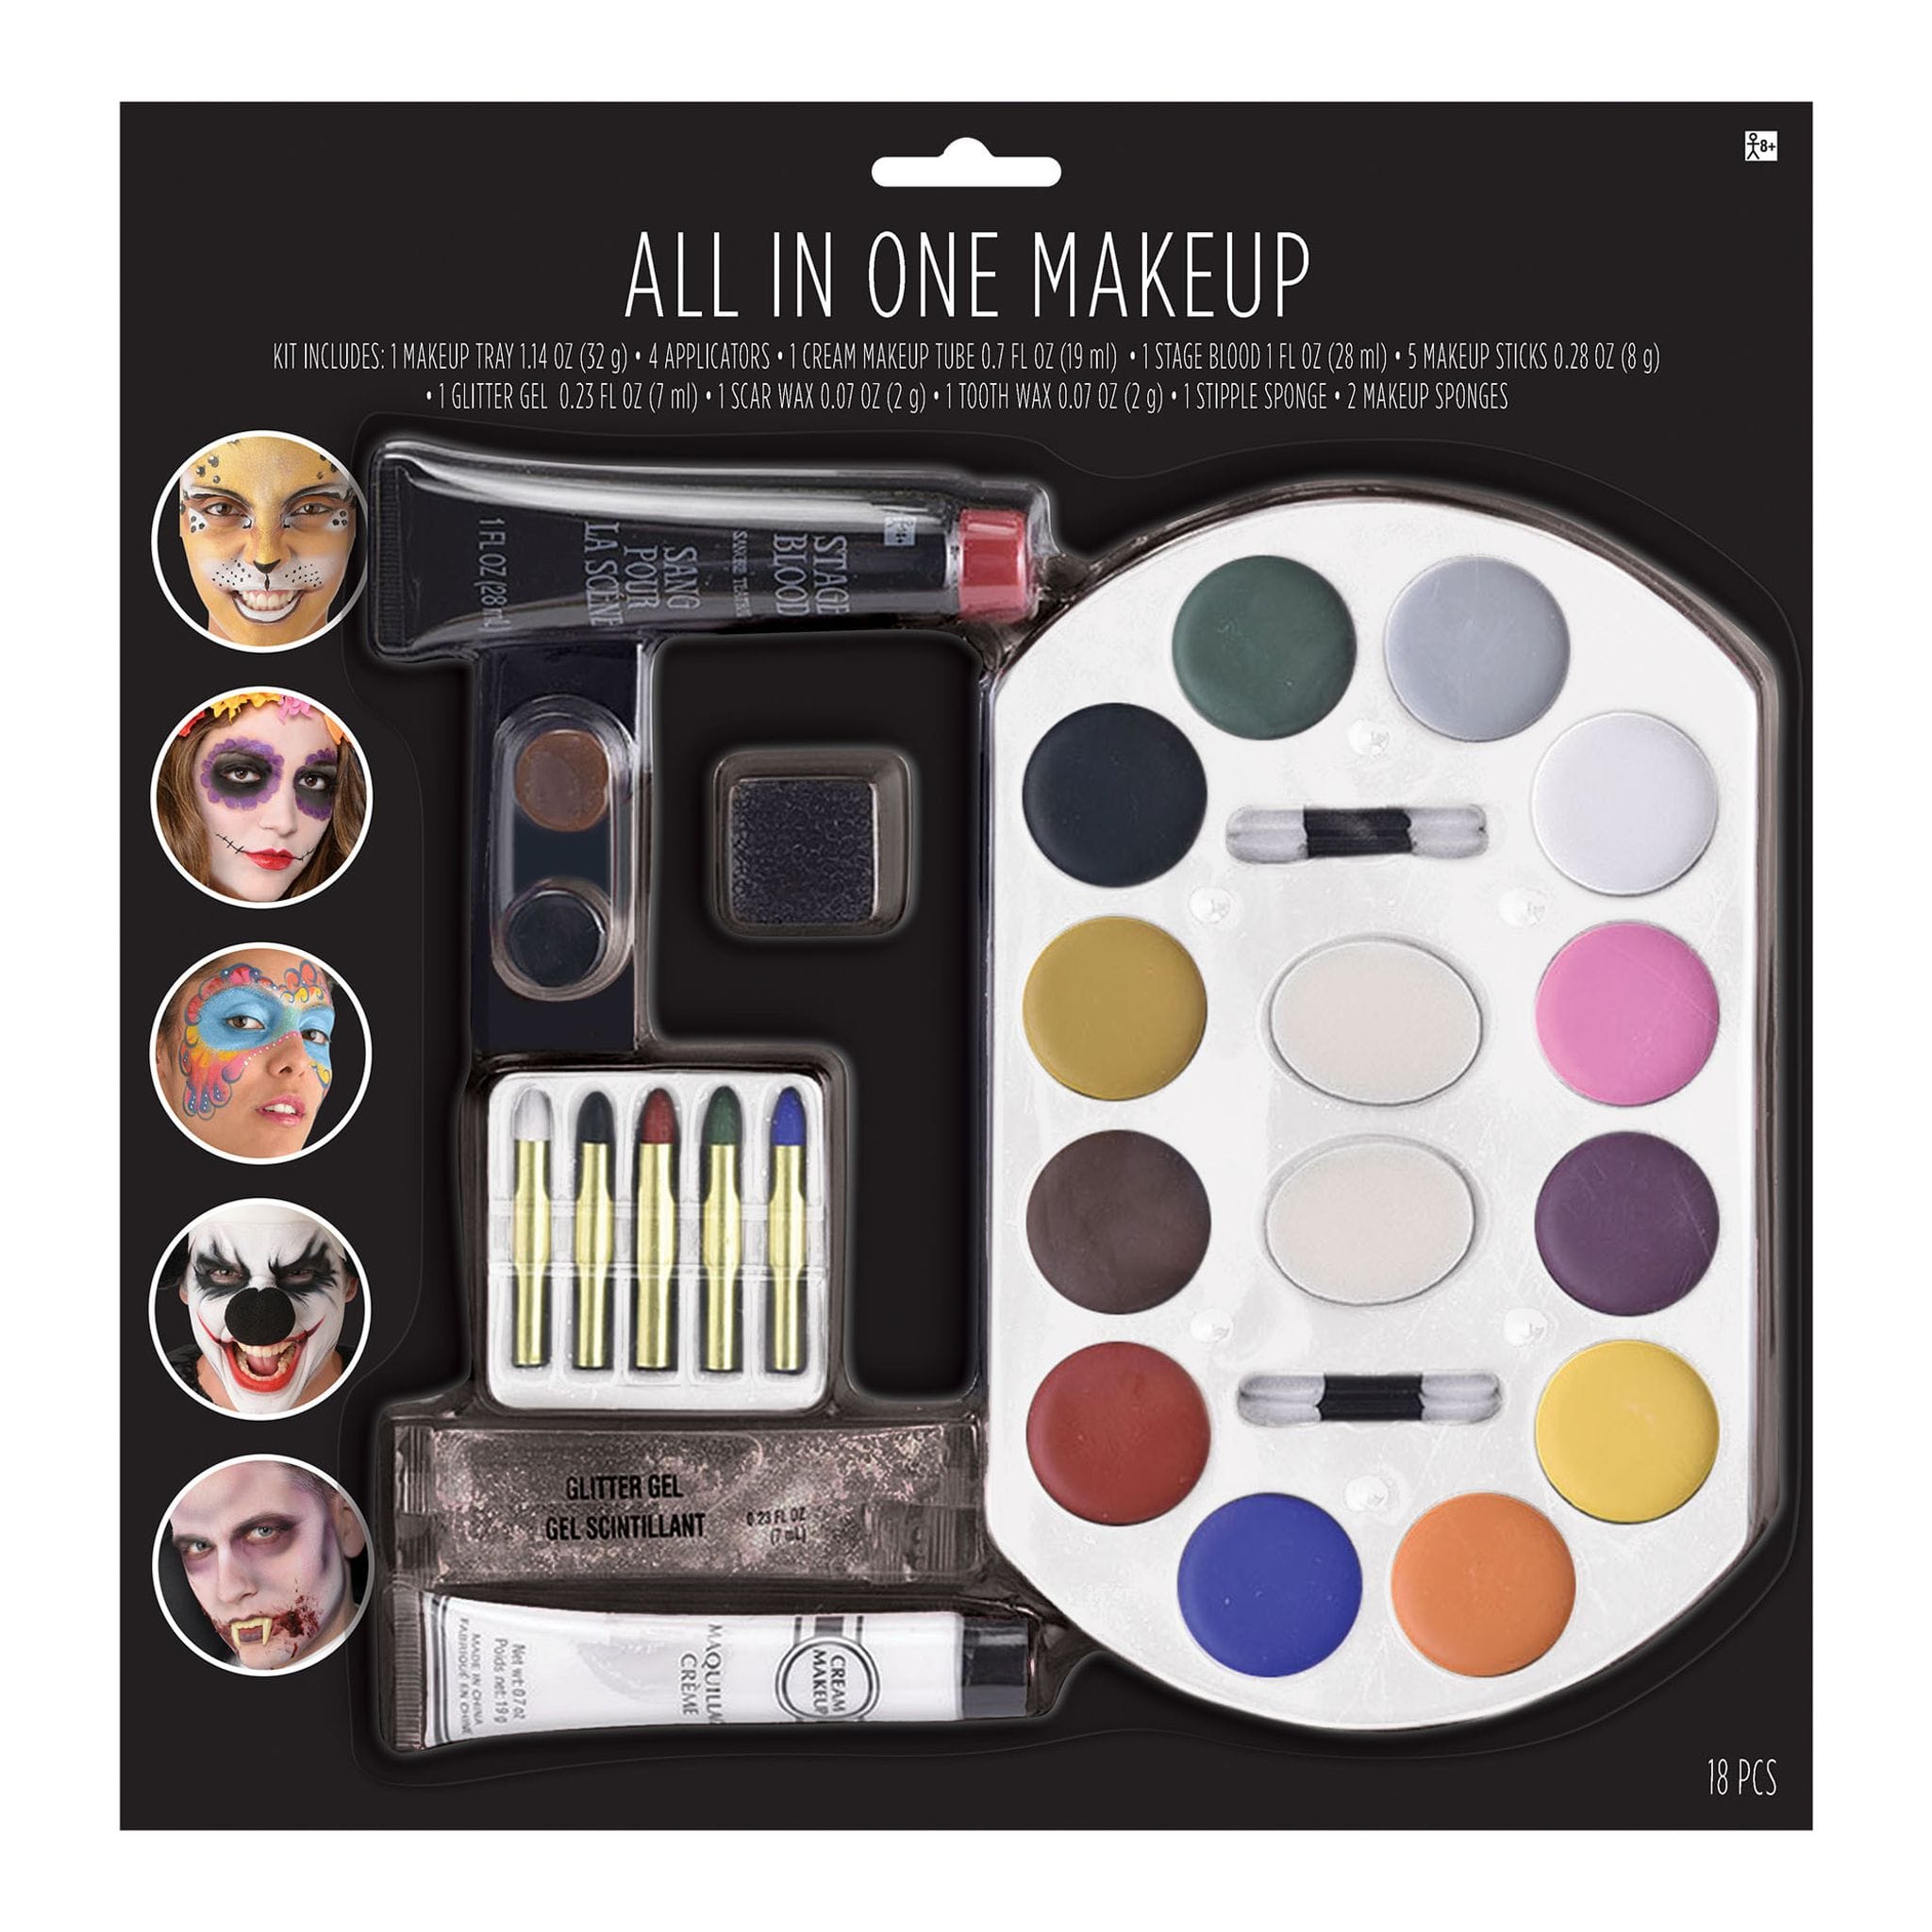 All-in-One Halloween Makeup Kit